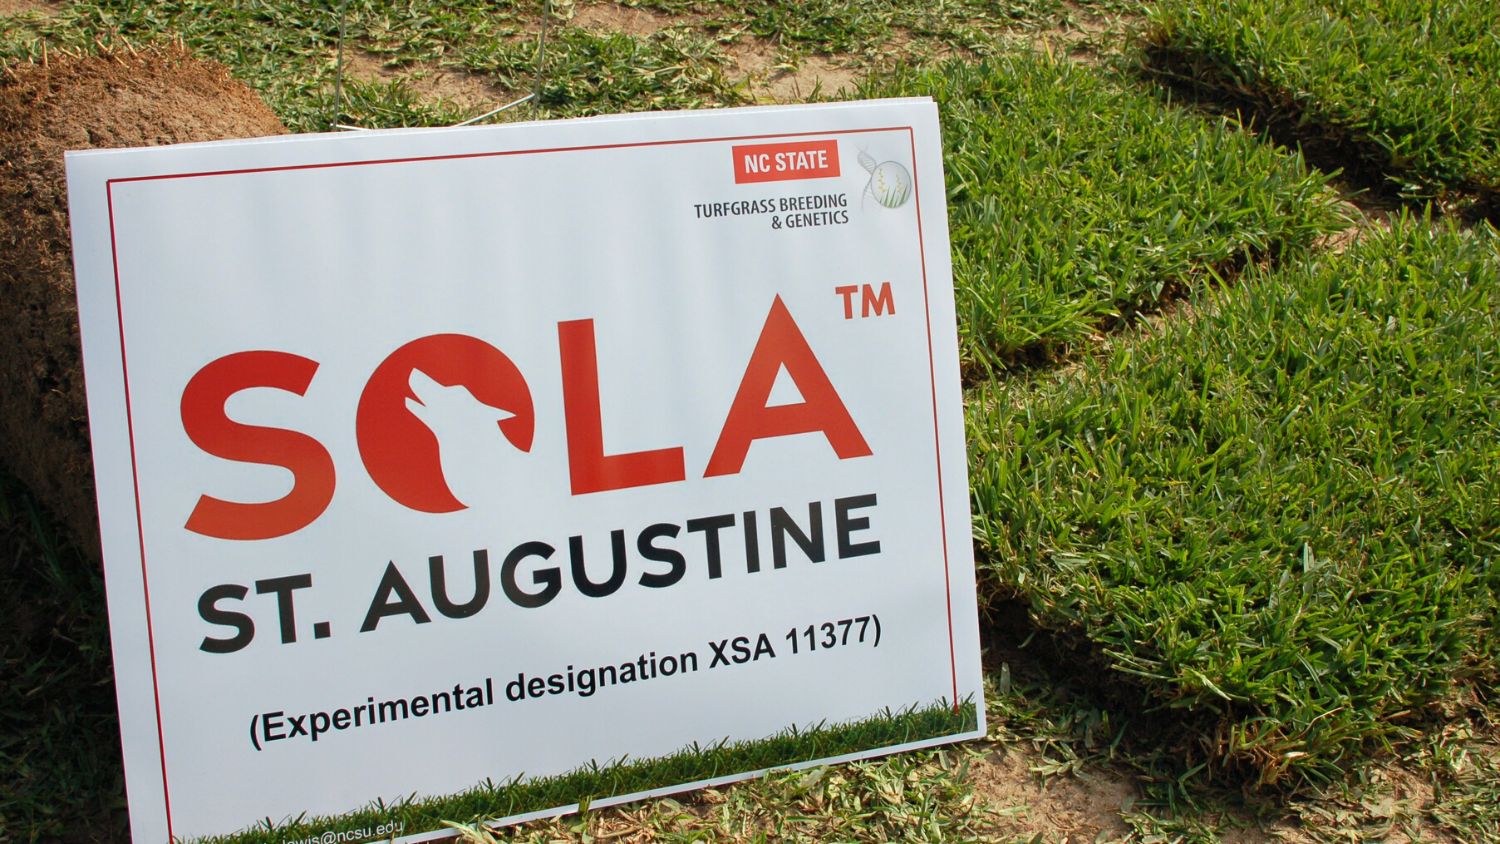 Sola St. Augustine sod samples and signage